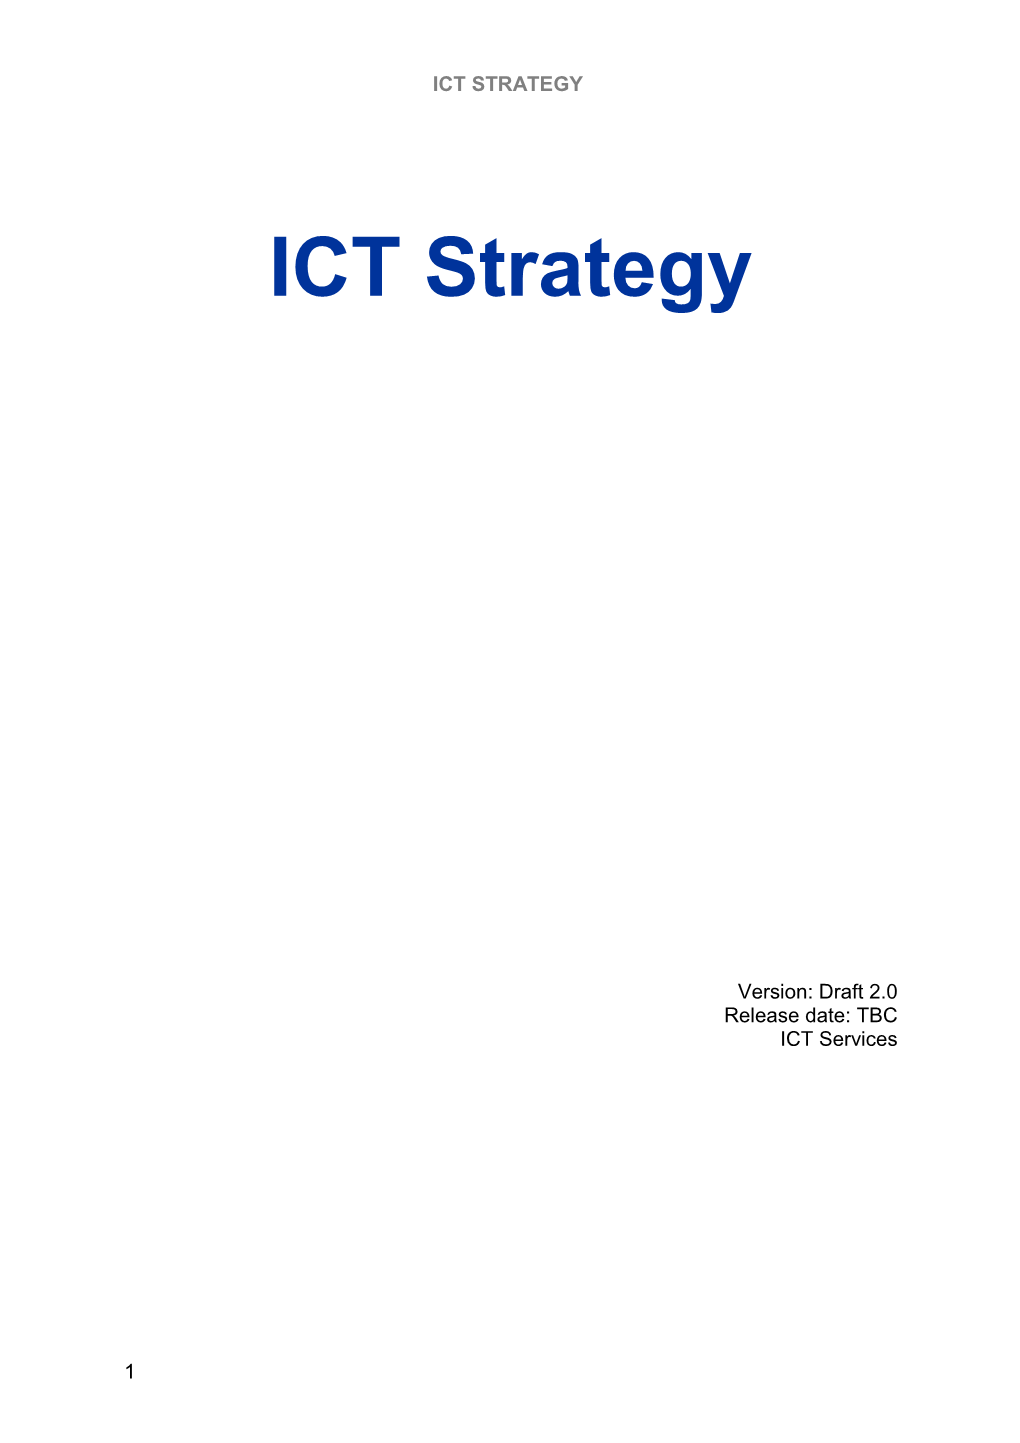 ICT Strategy 2012-2017 - Revision 1 2013